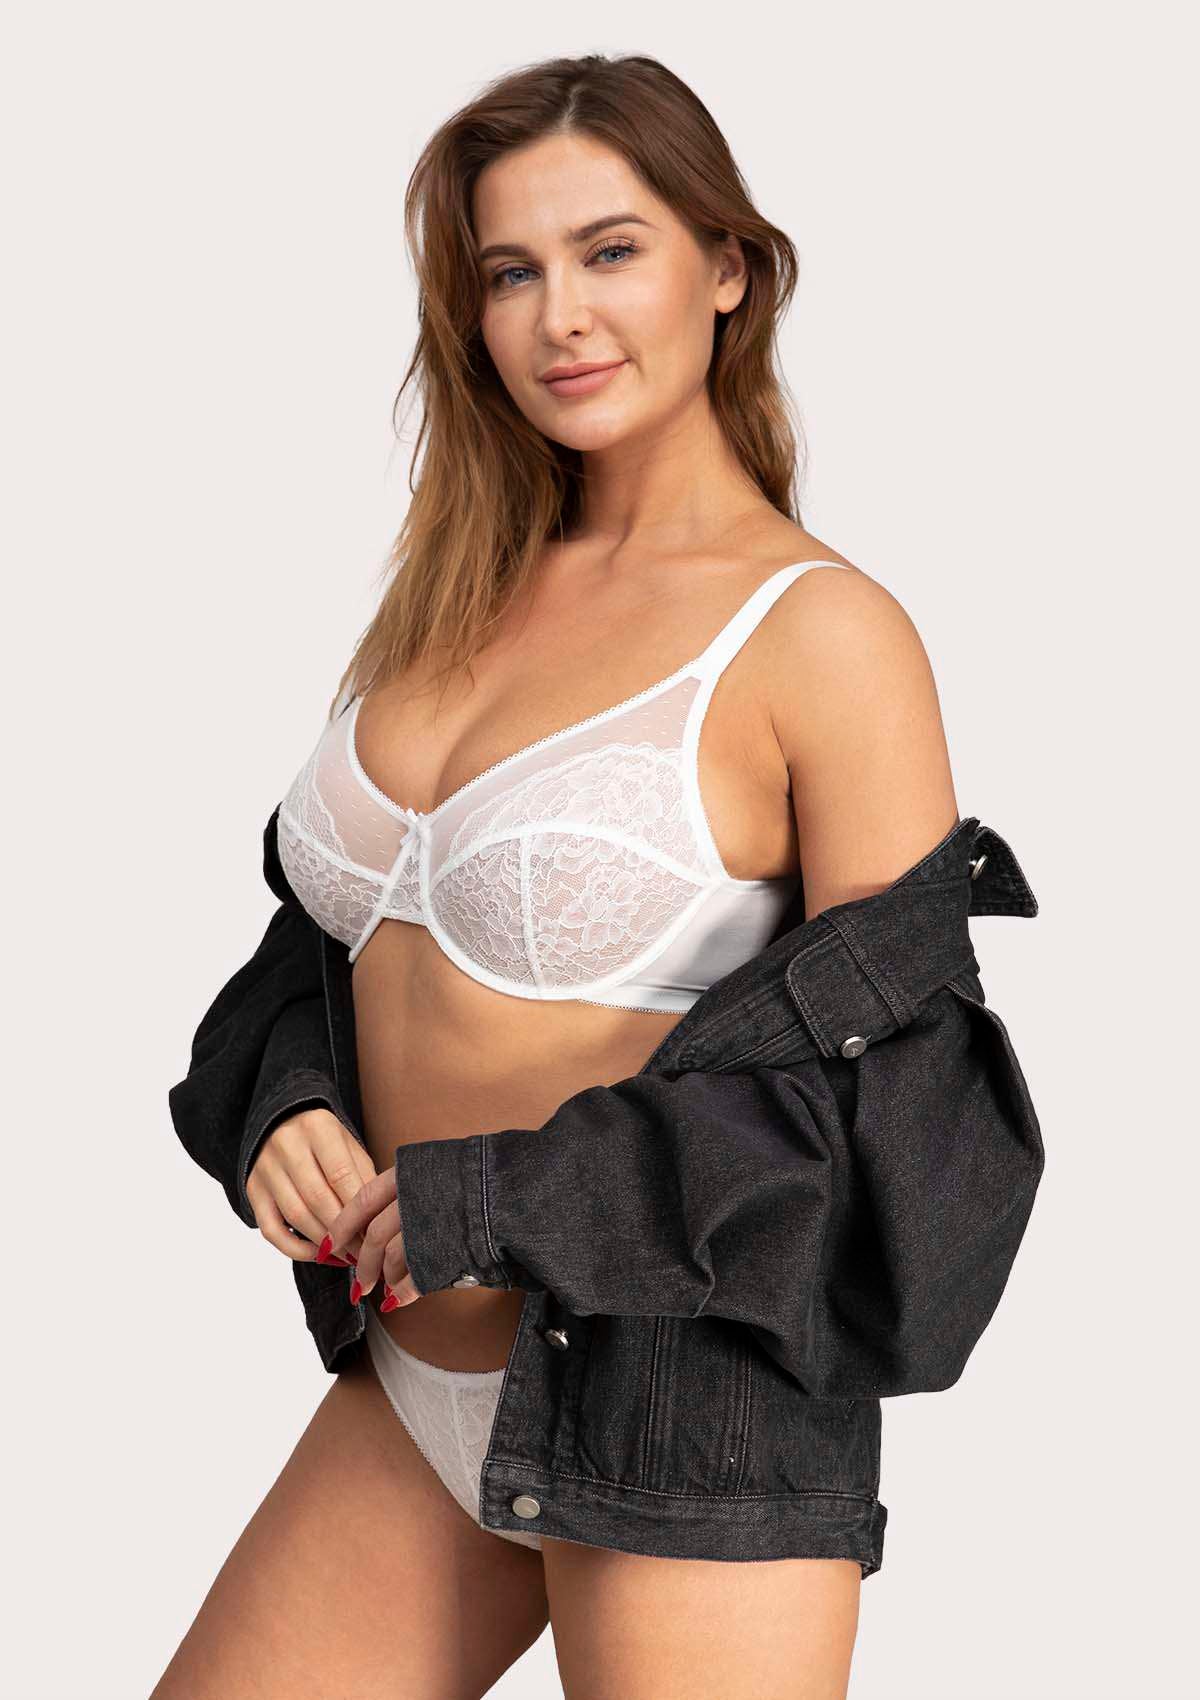 HSIA Enchante Lace Bra And Panties Set: Bra For Side And Back Fat - White / 38 / DD/E